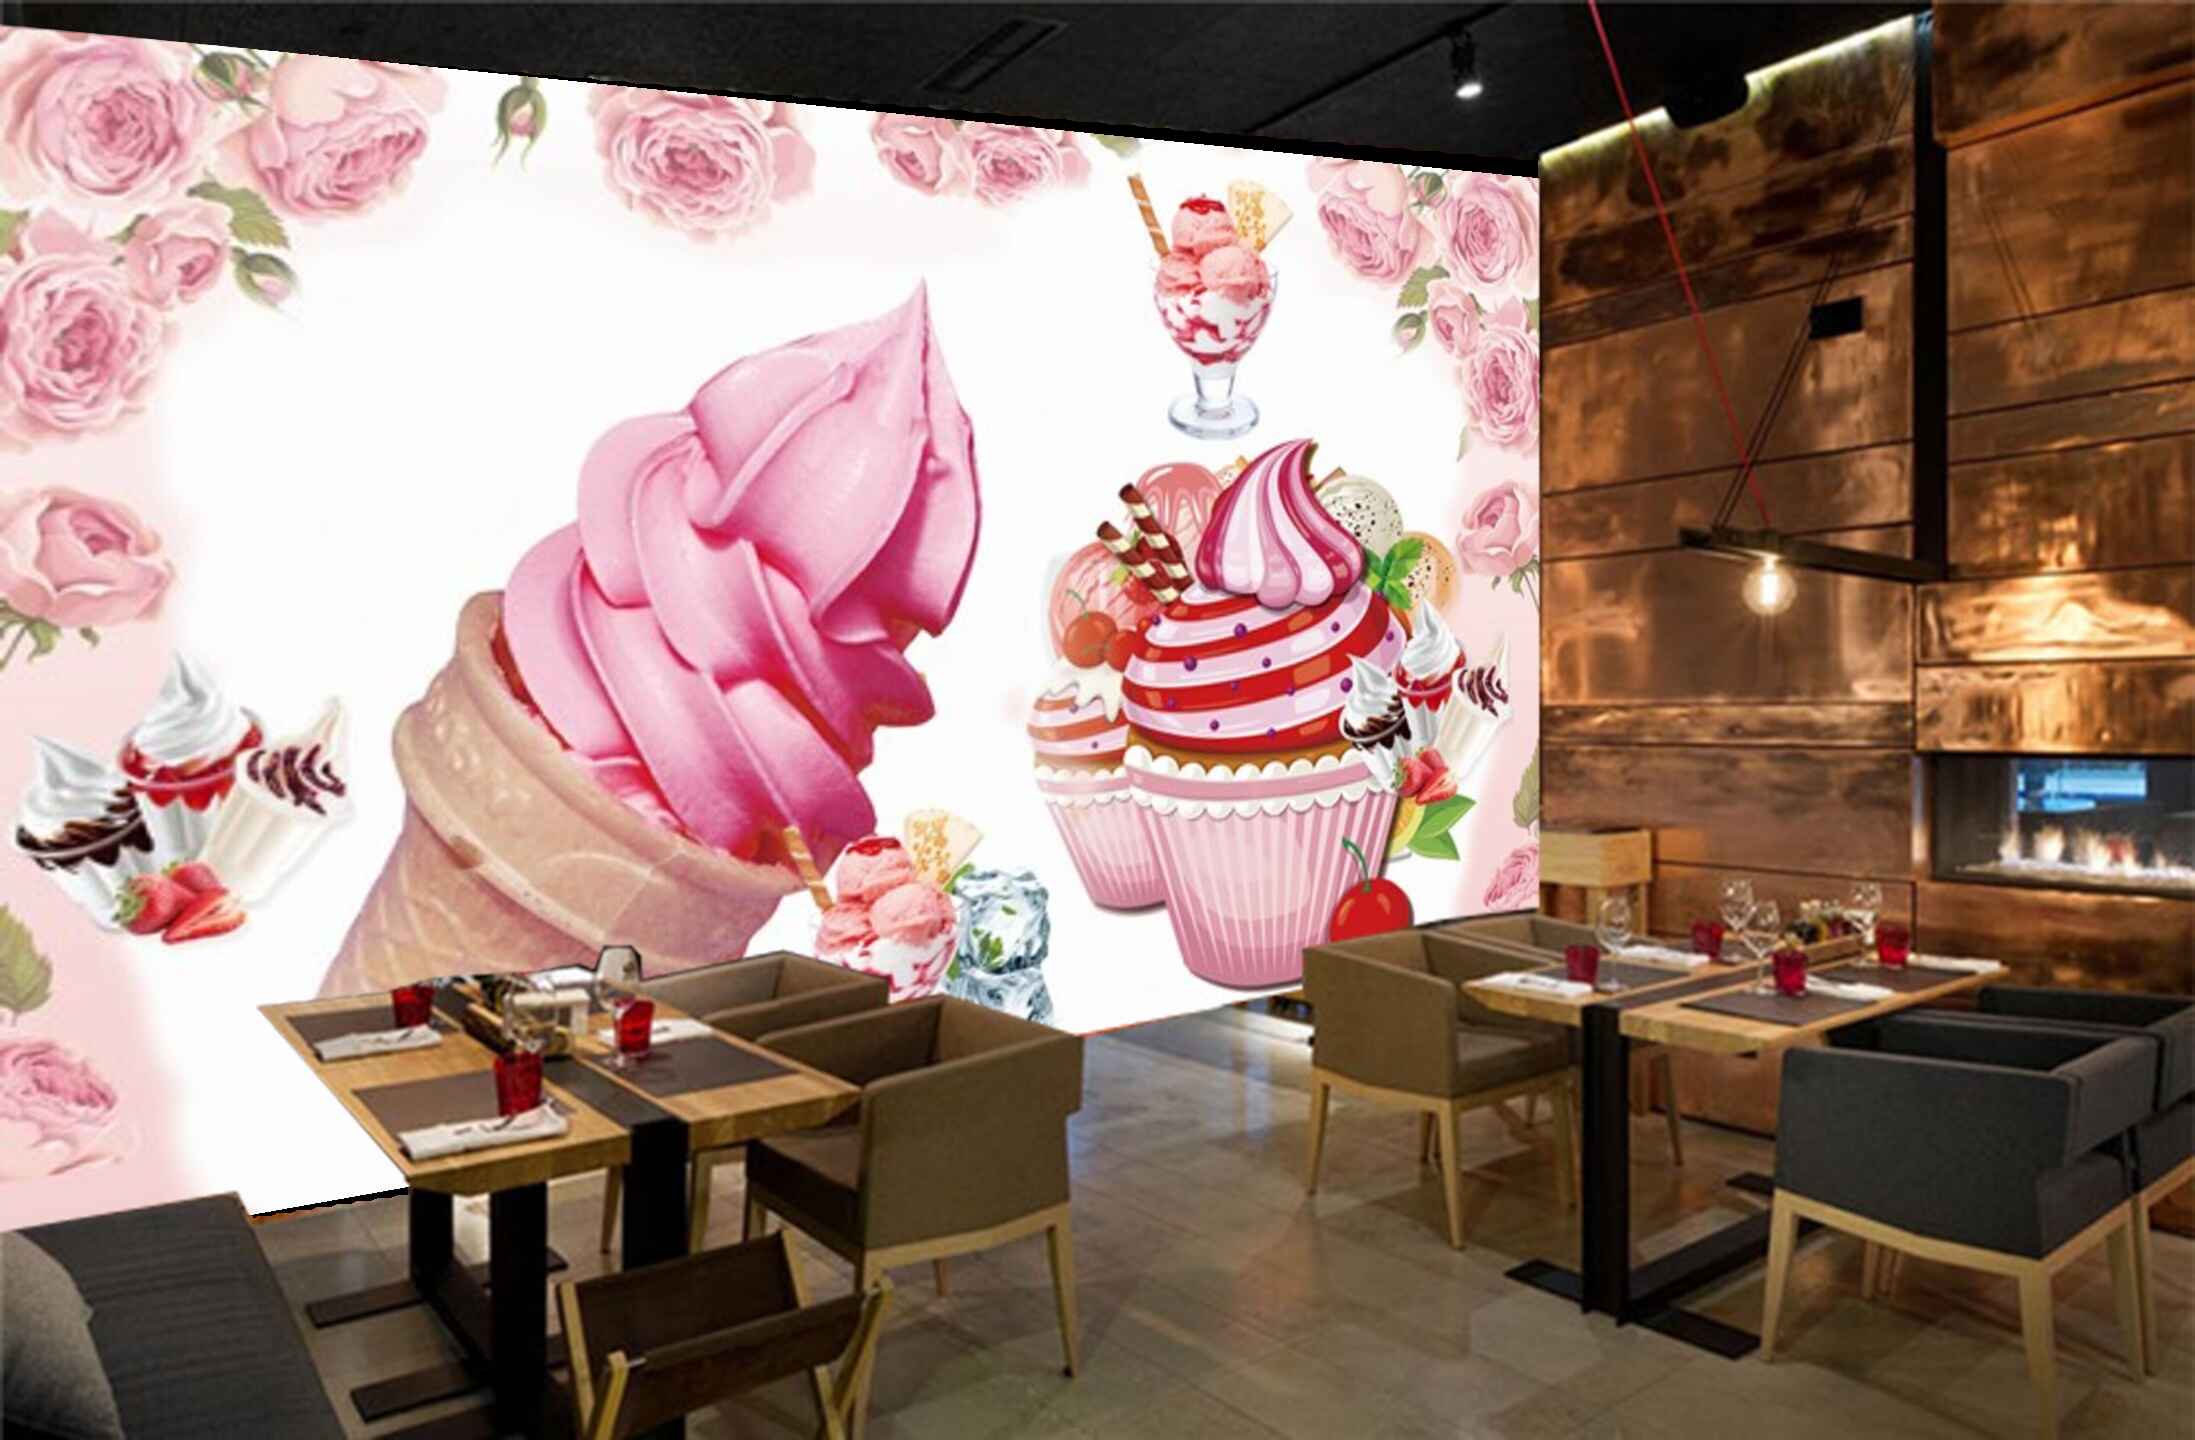 Avikalp MWZ3030 Cupcakes Ice Creams Cherries Pink Roses HD Wallpaper for Cafe Restaurant